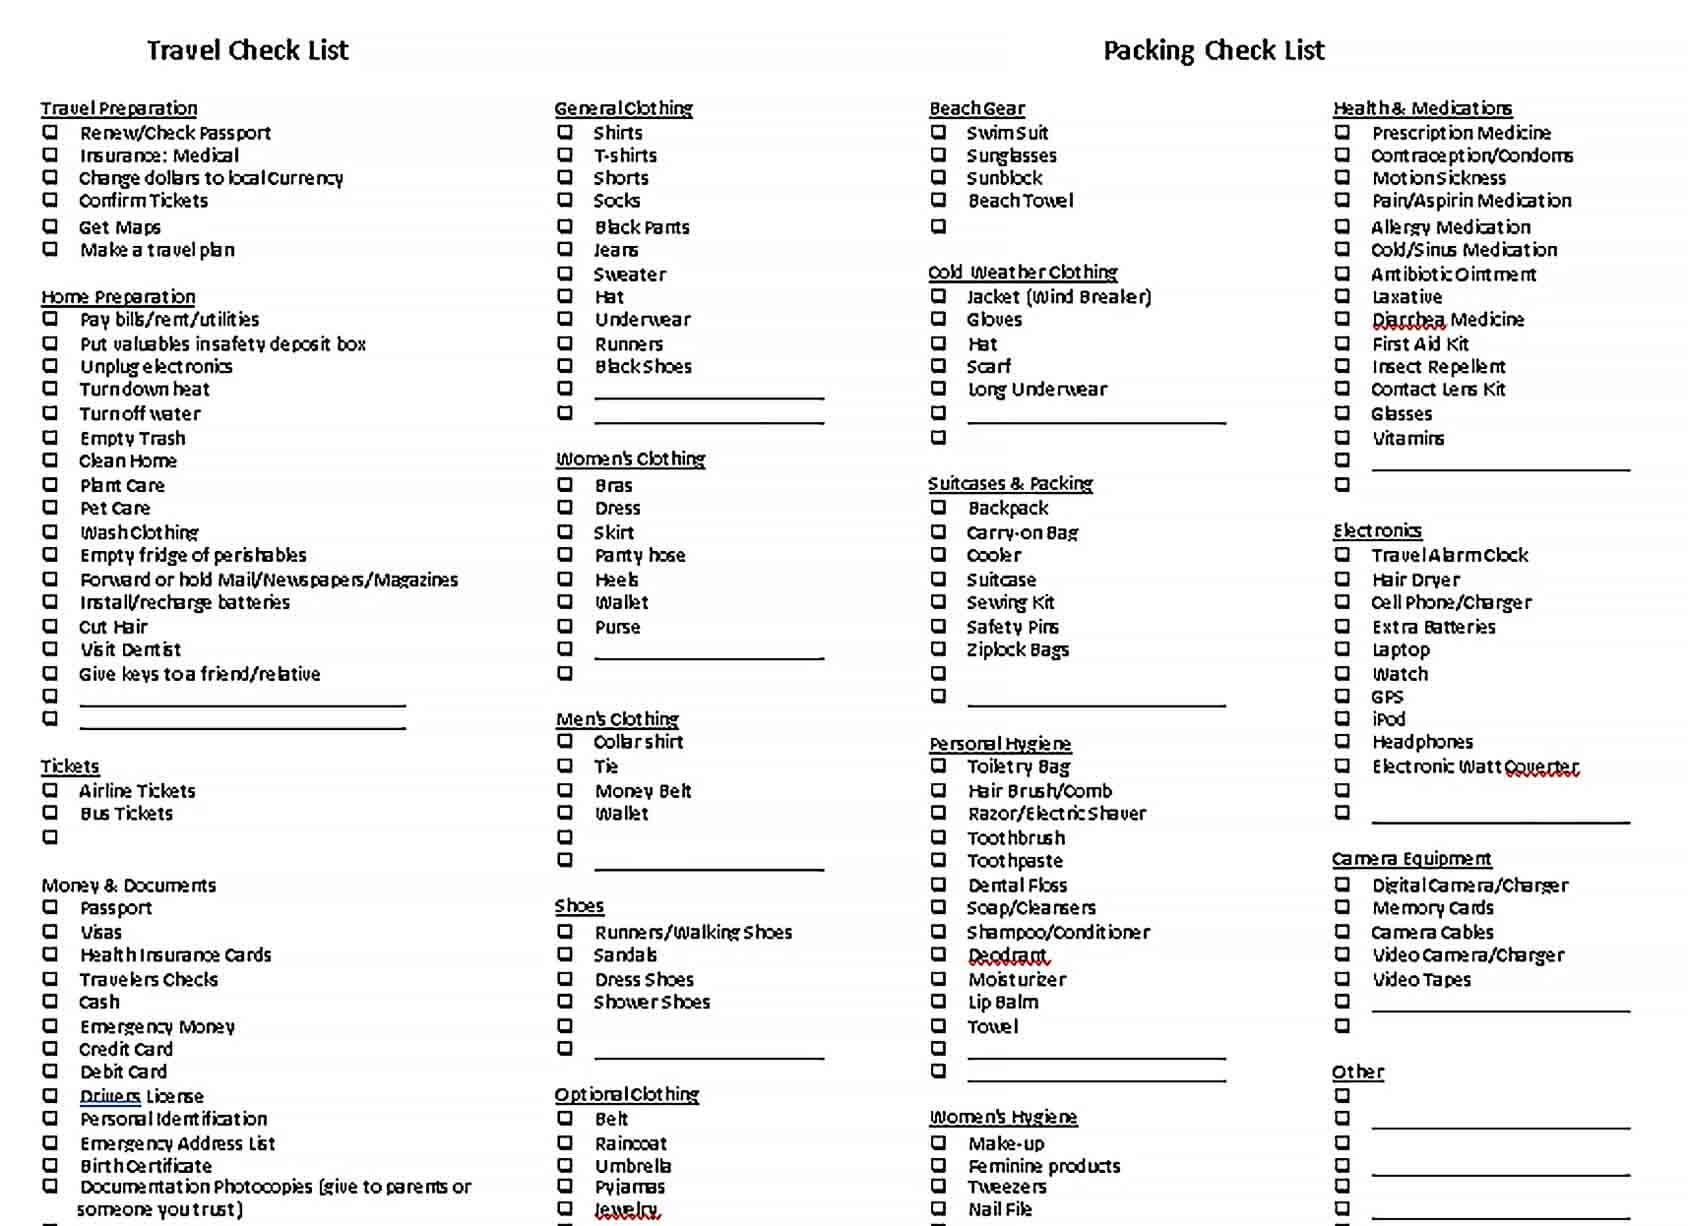 Sample Checklist of Travel Packing